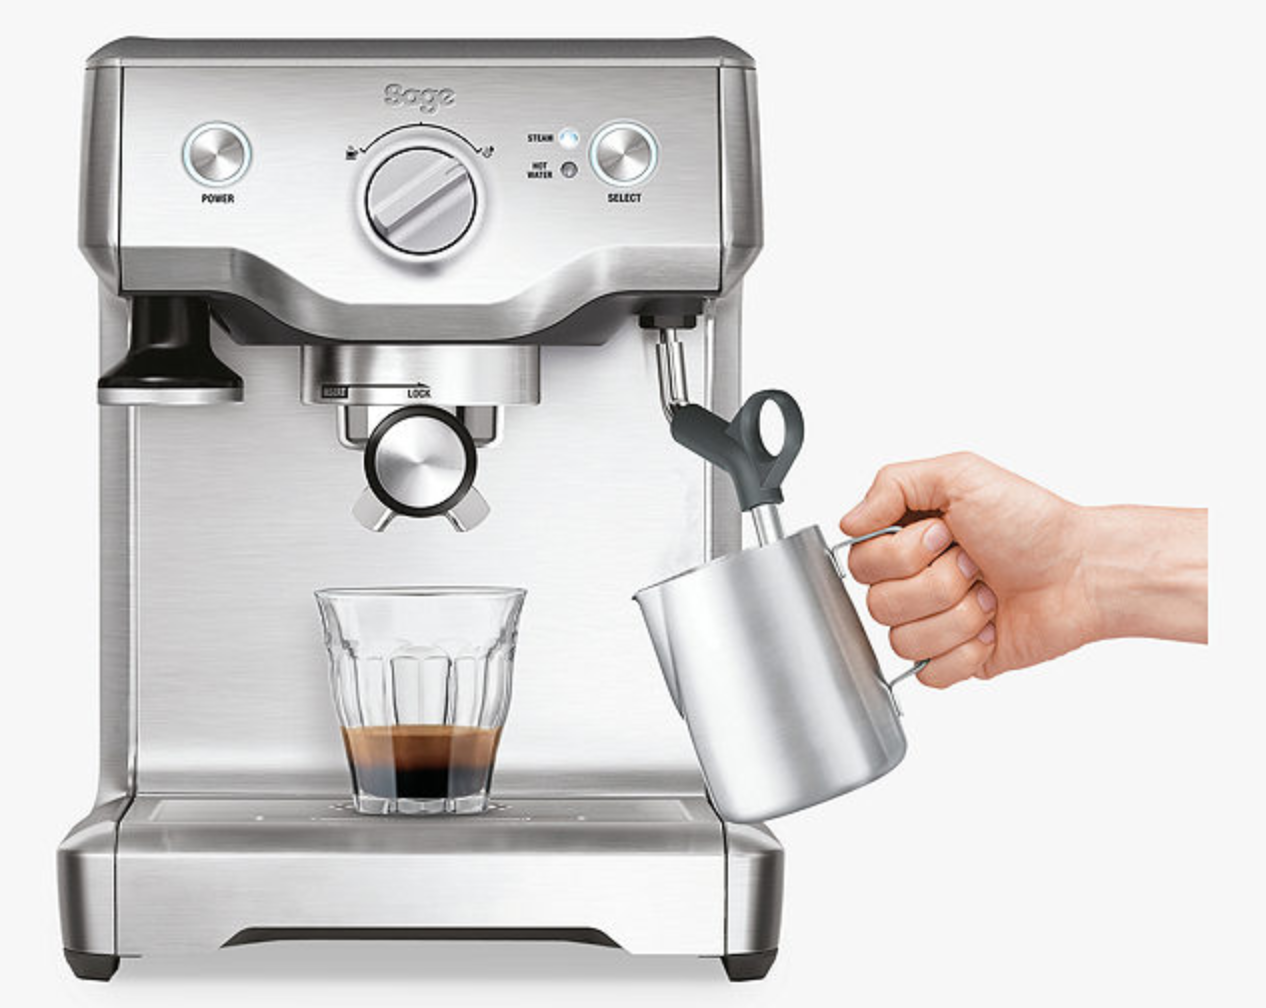 Espresso followers will froth over this Sage Barista value minimize | Digital Noch